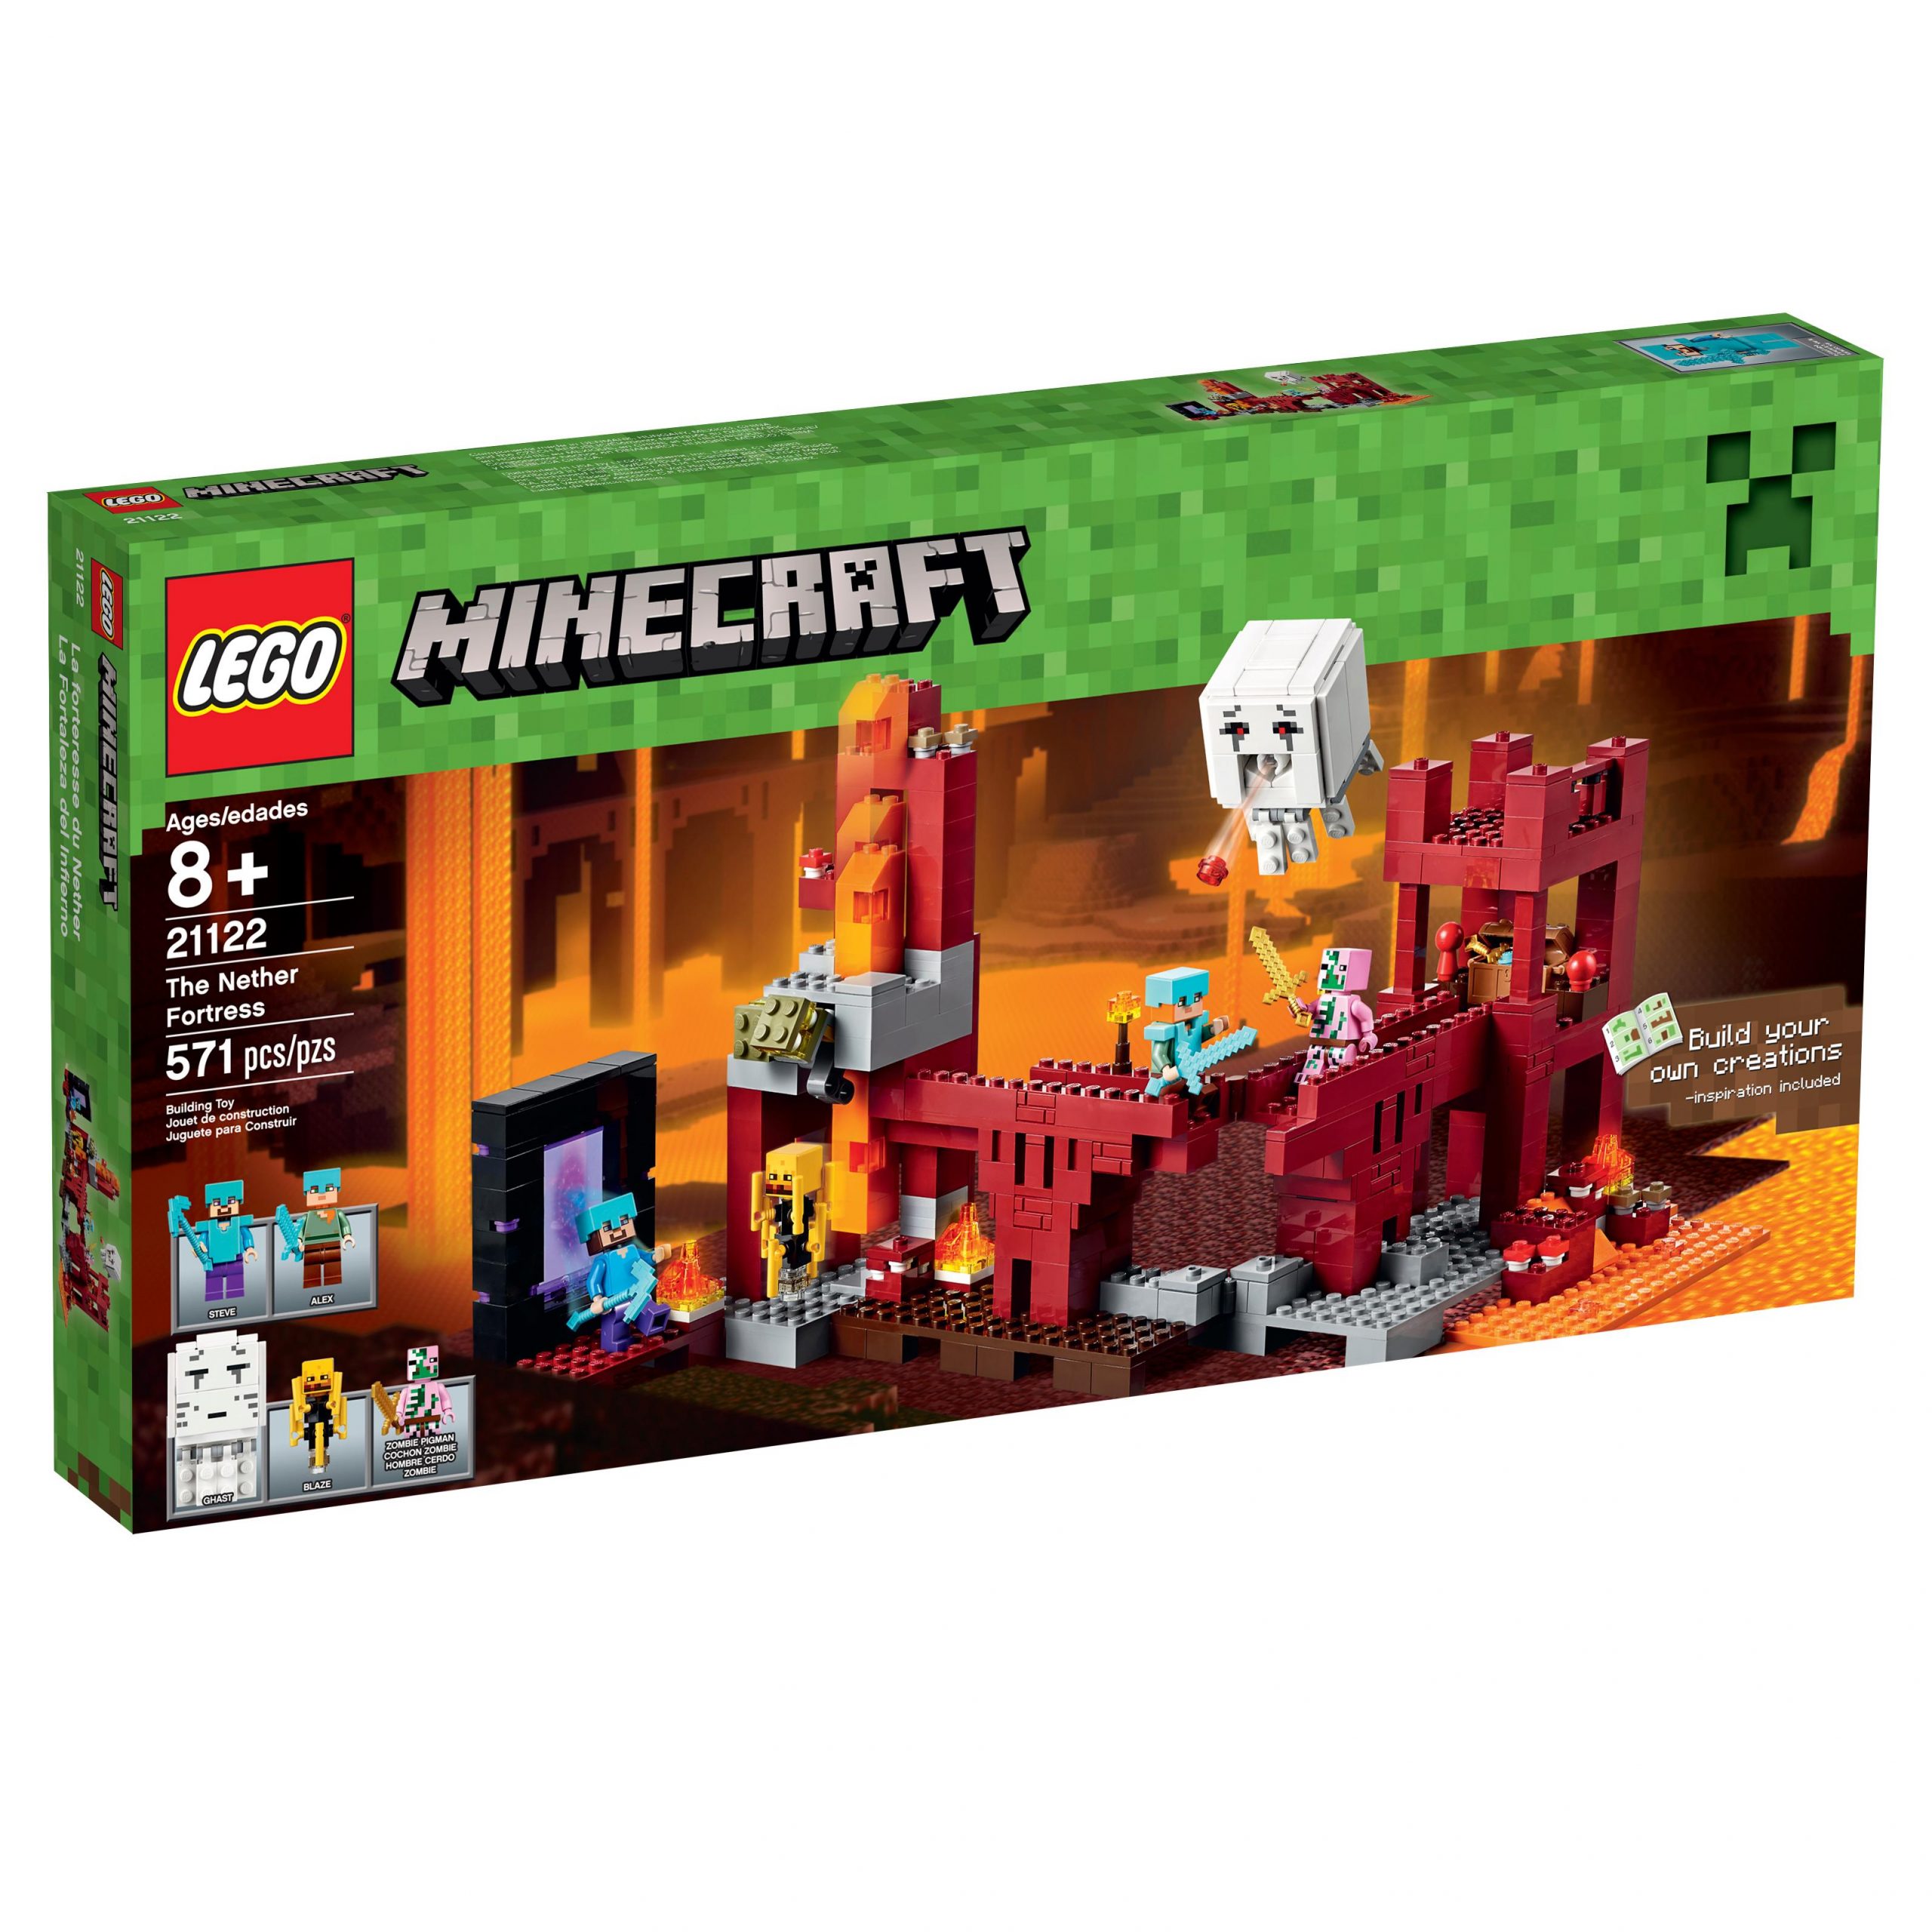 LEGO Minecraft The Nether Fortress 21122, Building Sets